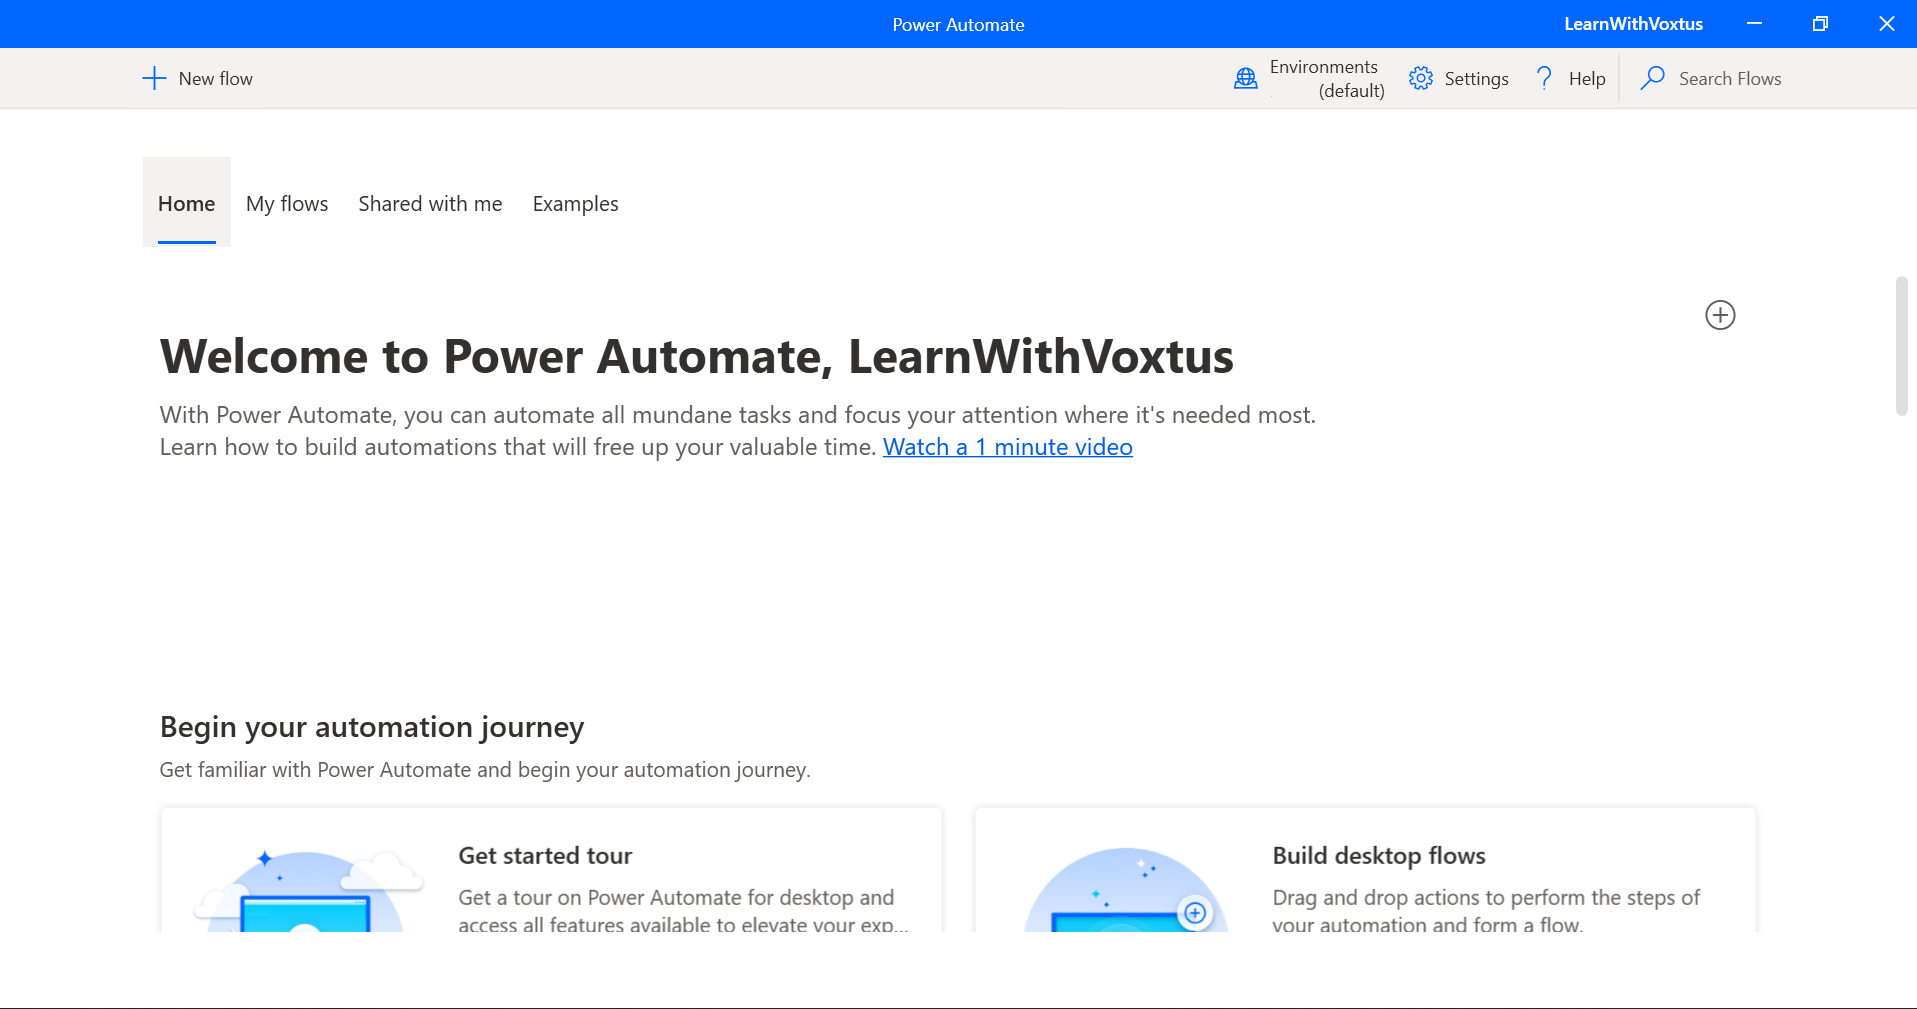 Accessing Power Automate